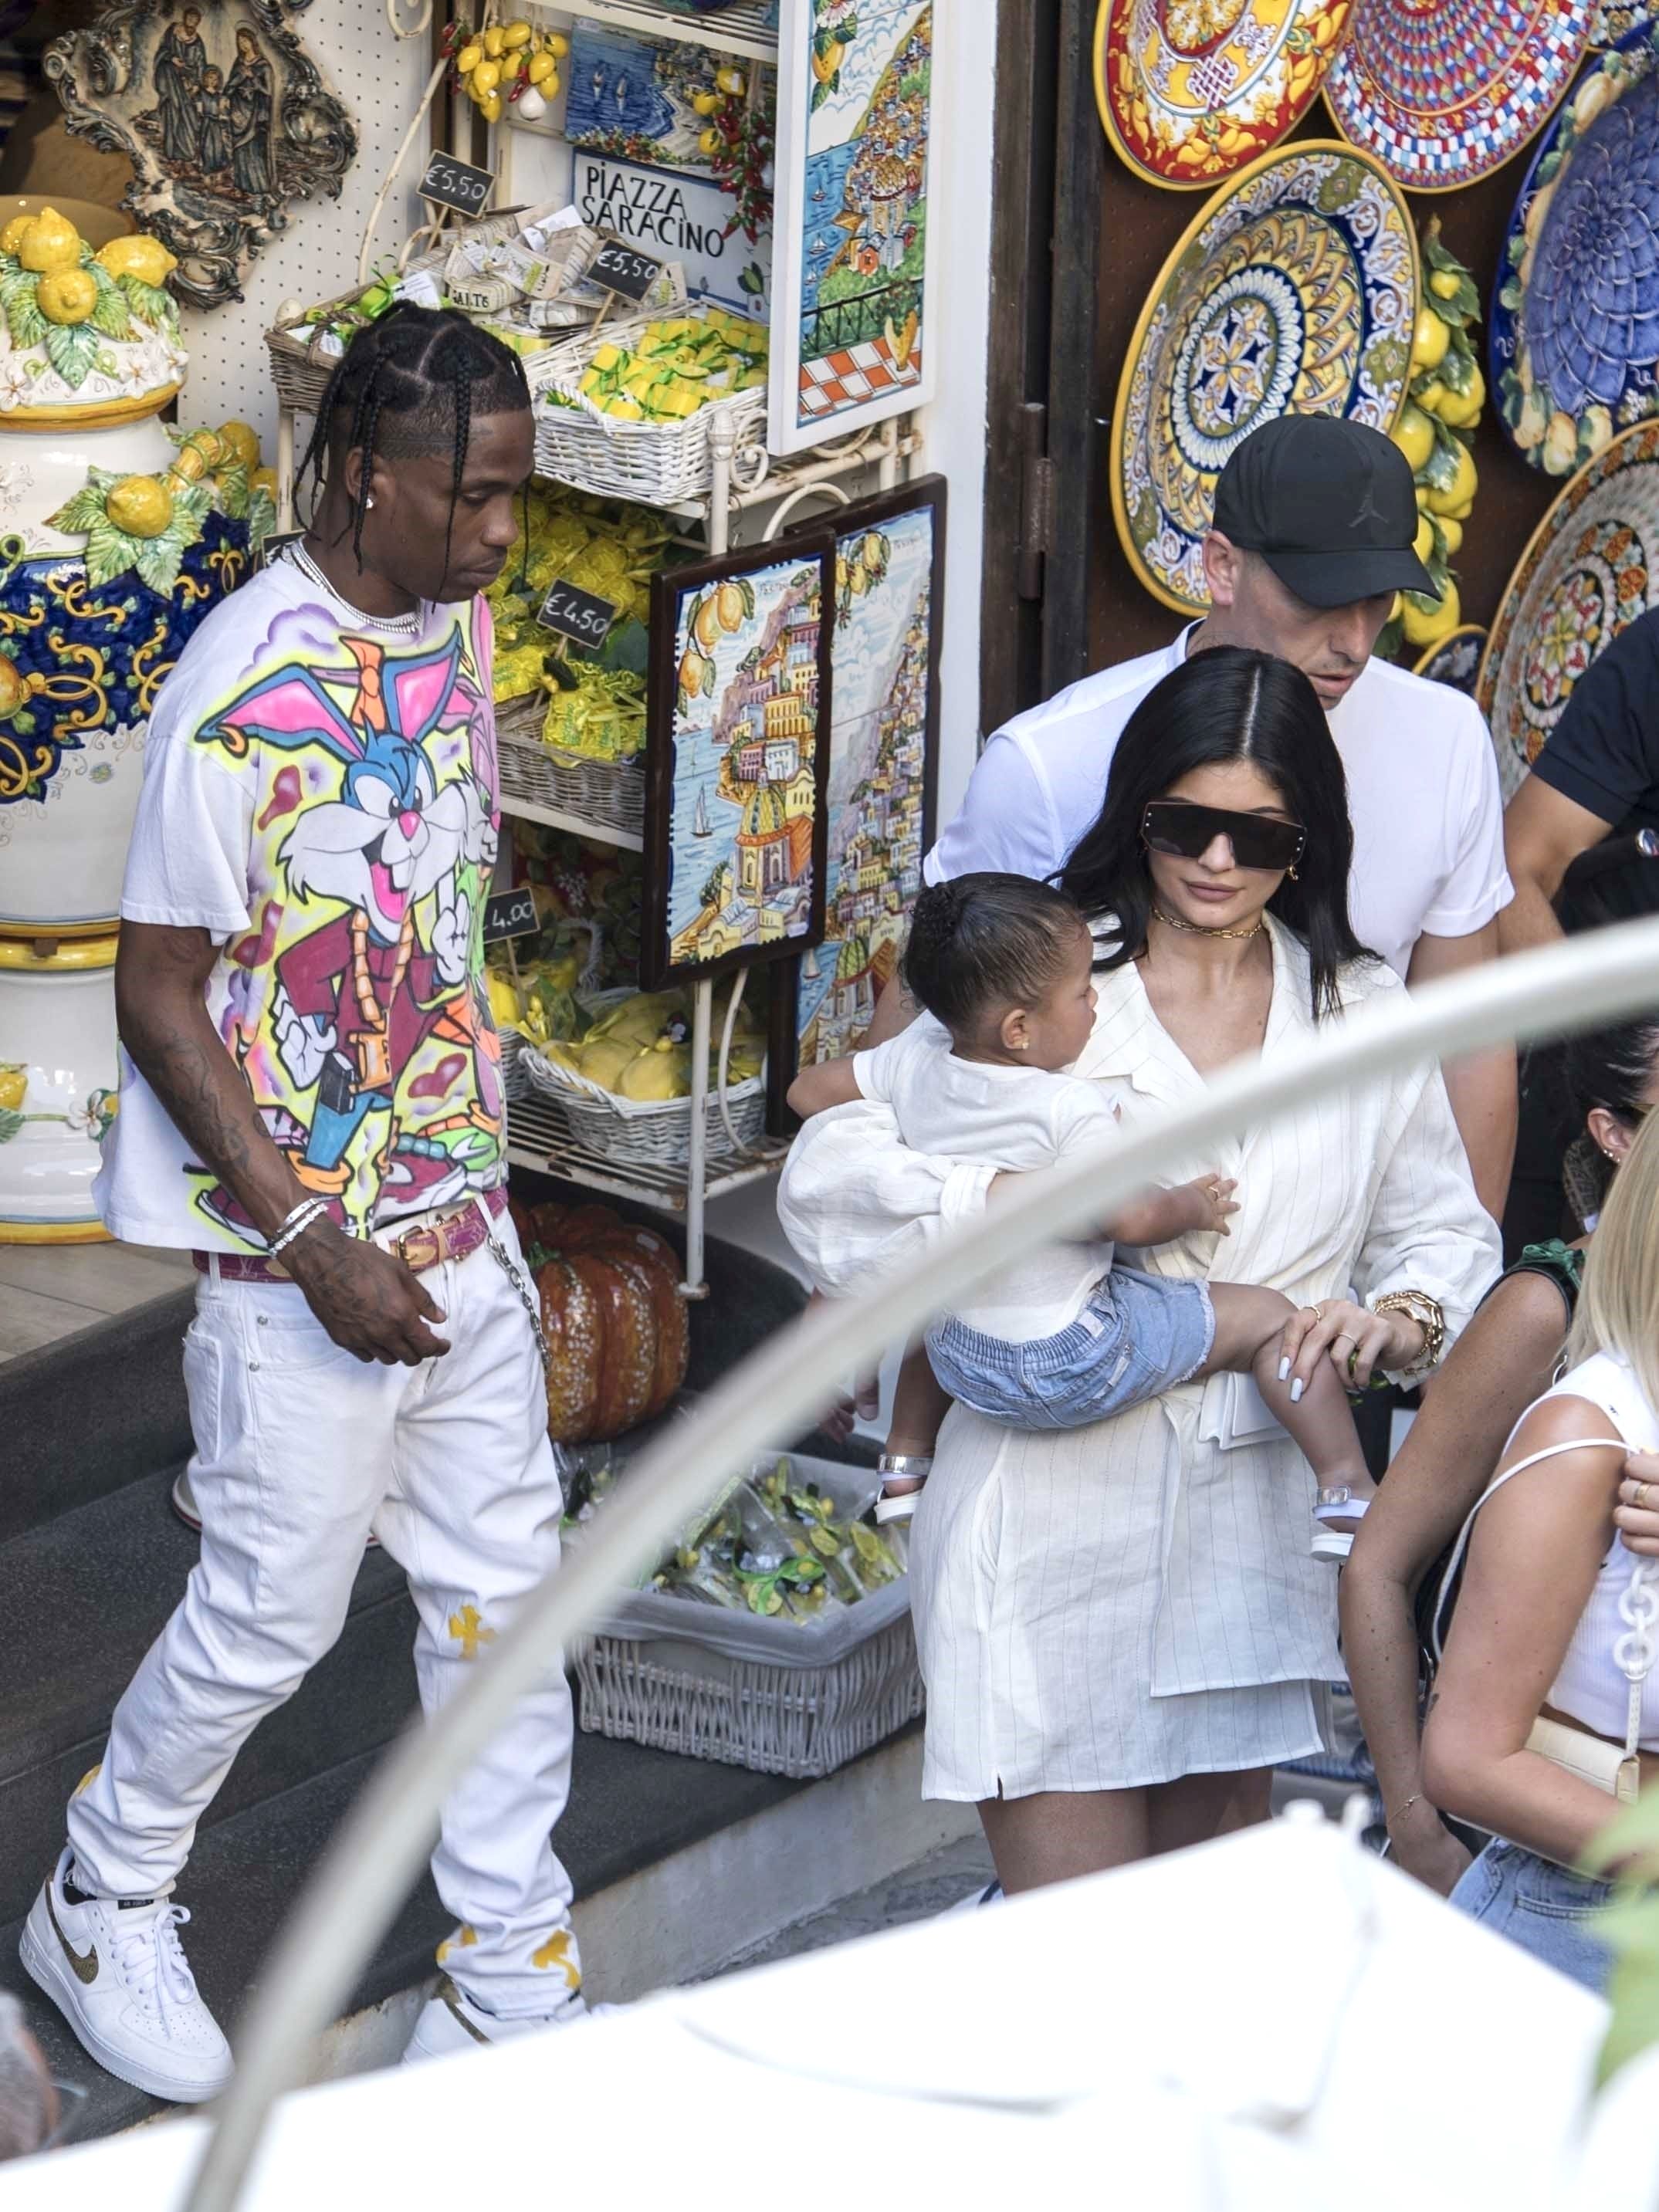 Kylie Jenner strolls the streets of Italy before ringing in her